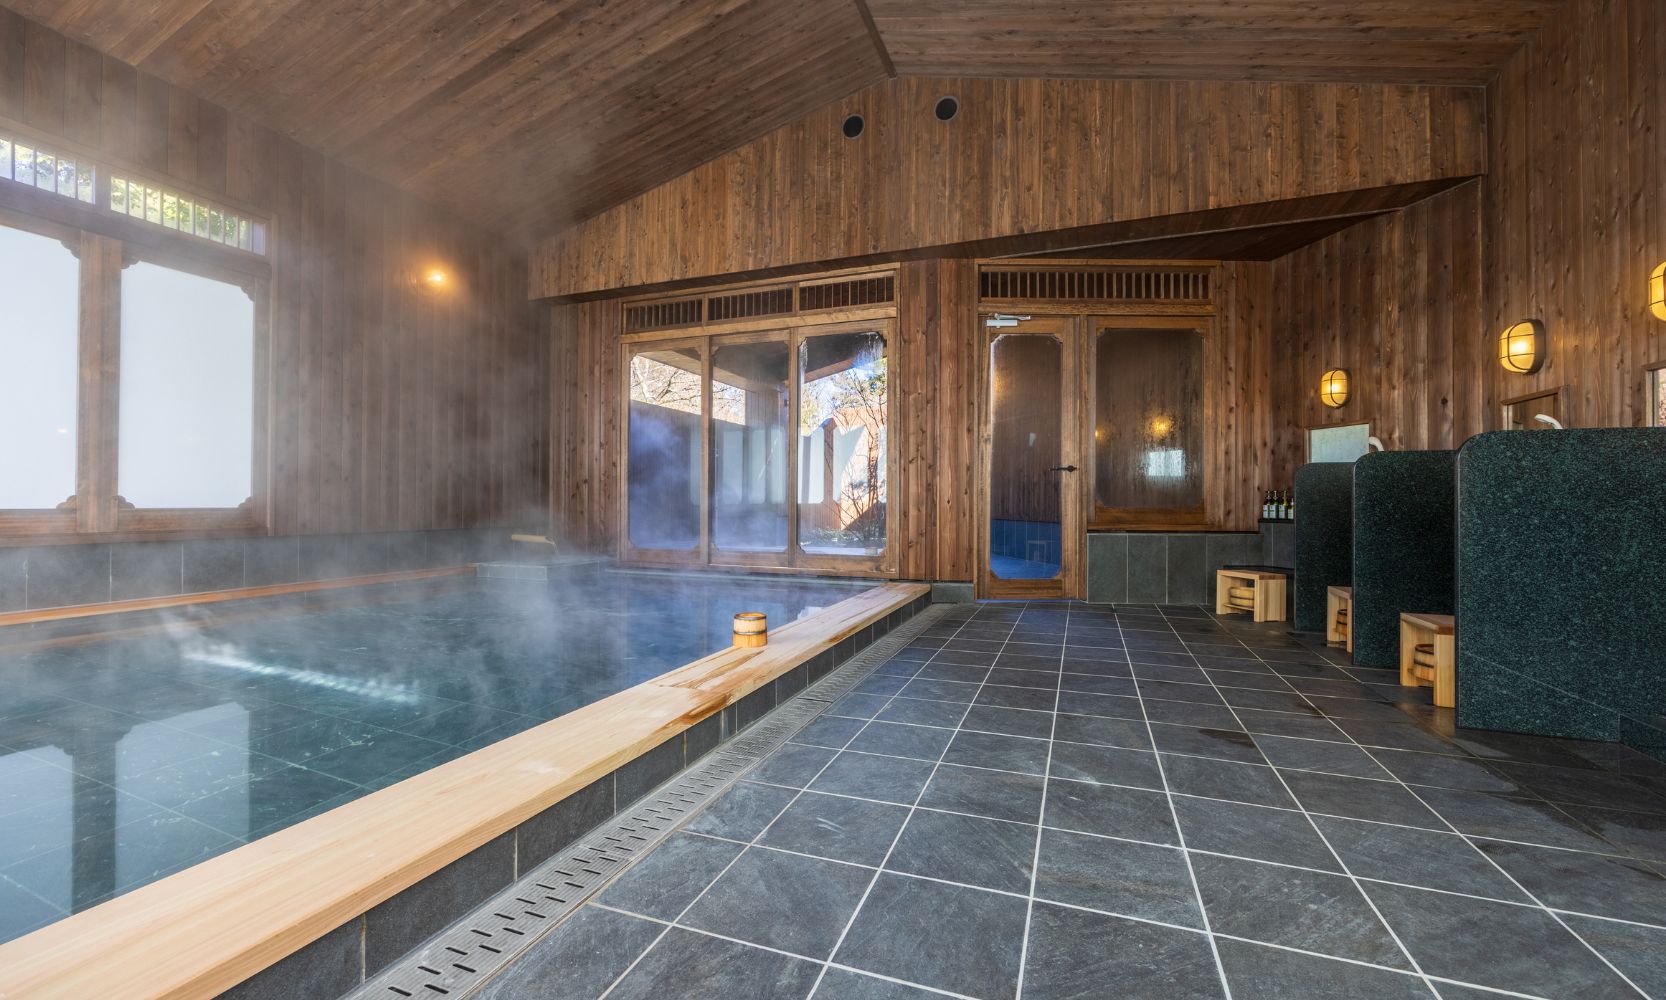 Matsuzakaya Honten, a 360-year-old establishment, is renewing its large communal bath to further enhance the enjoyment of its renowned hot spring.